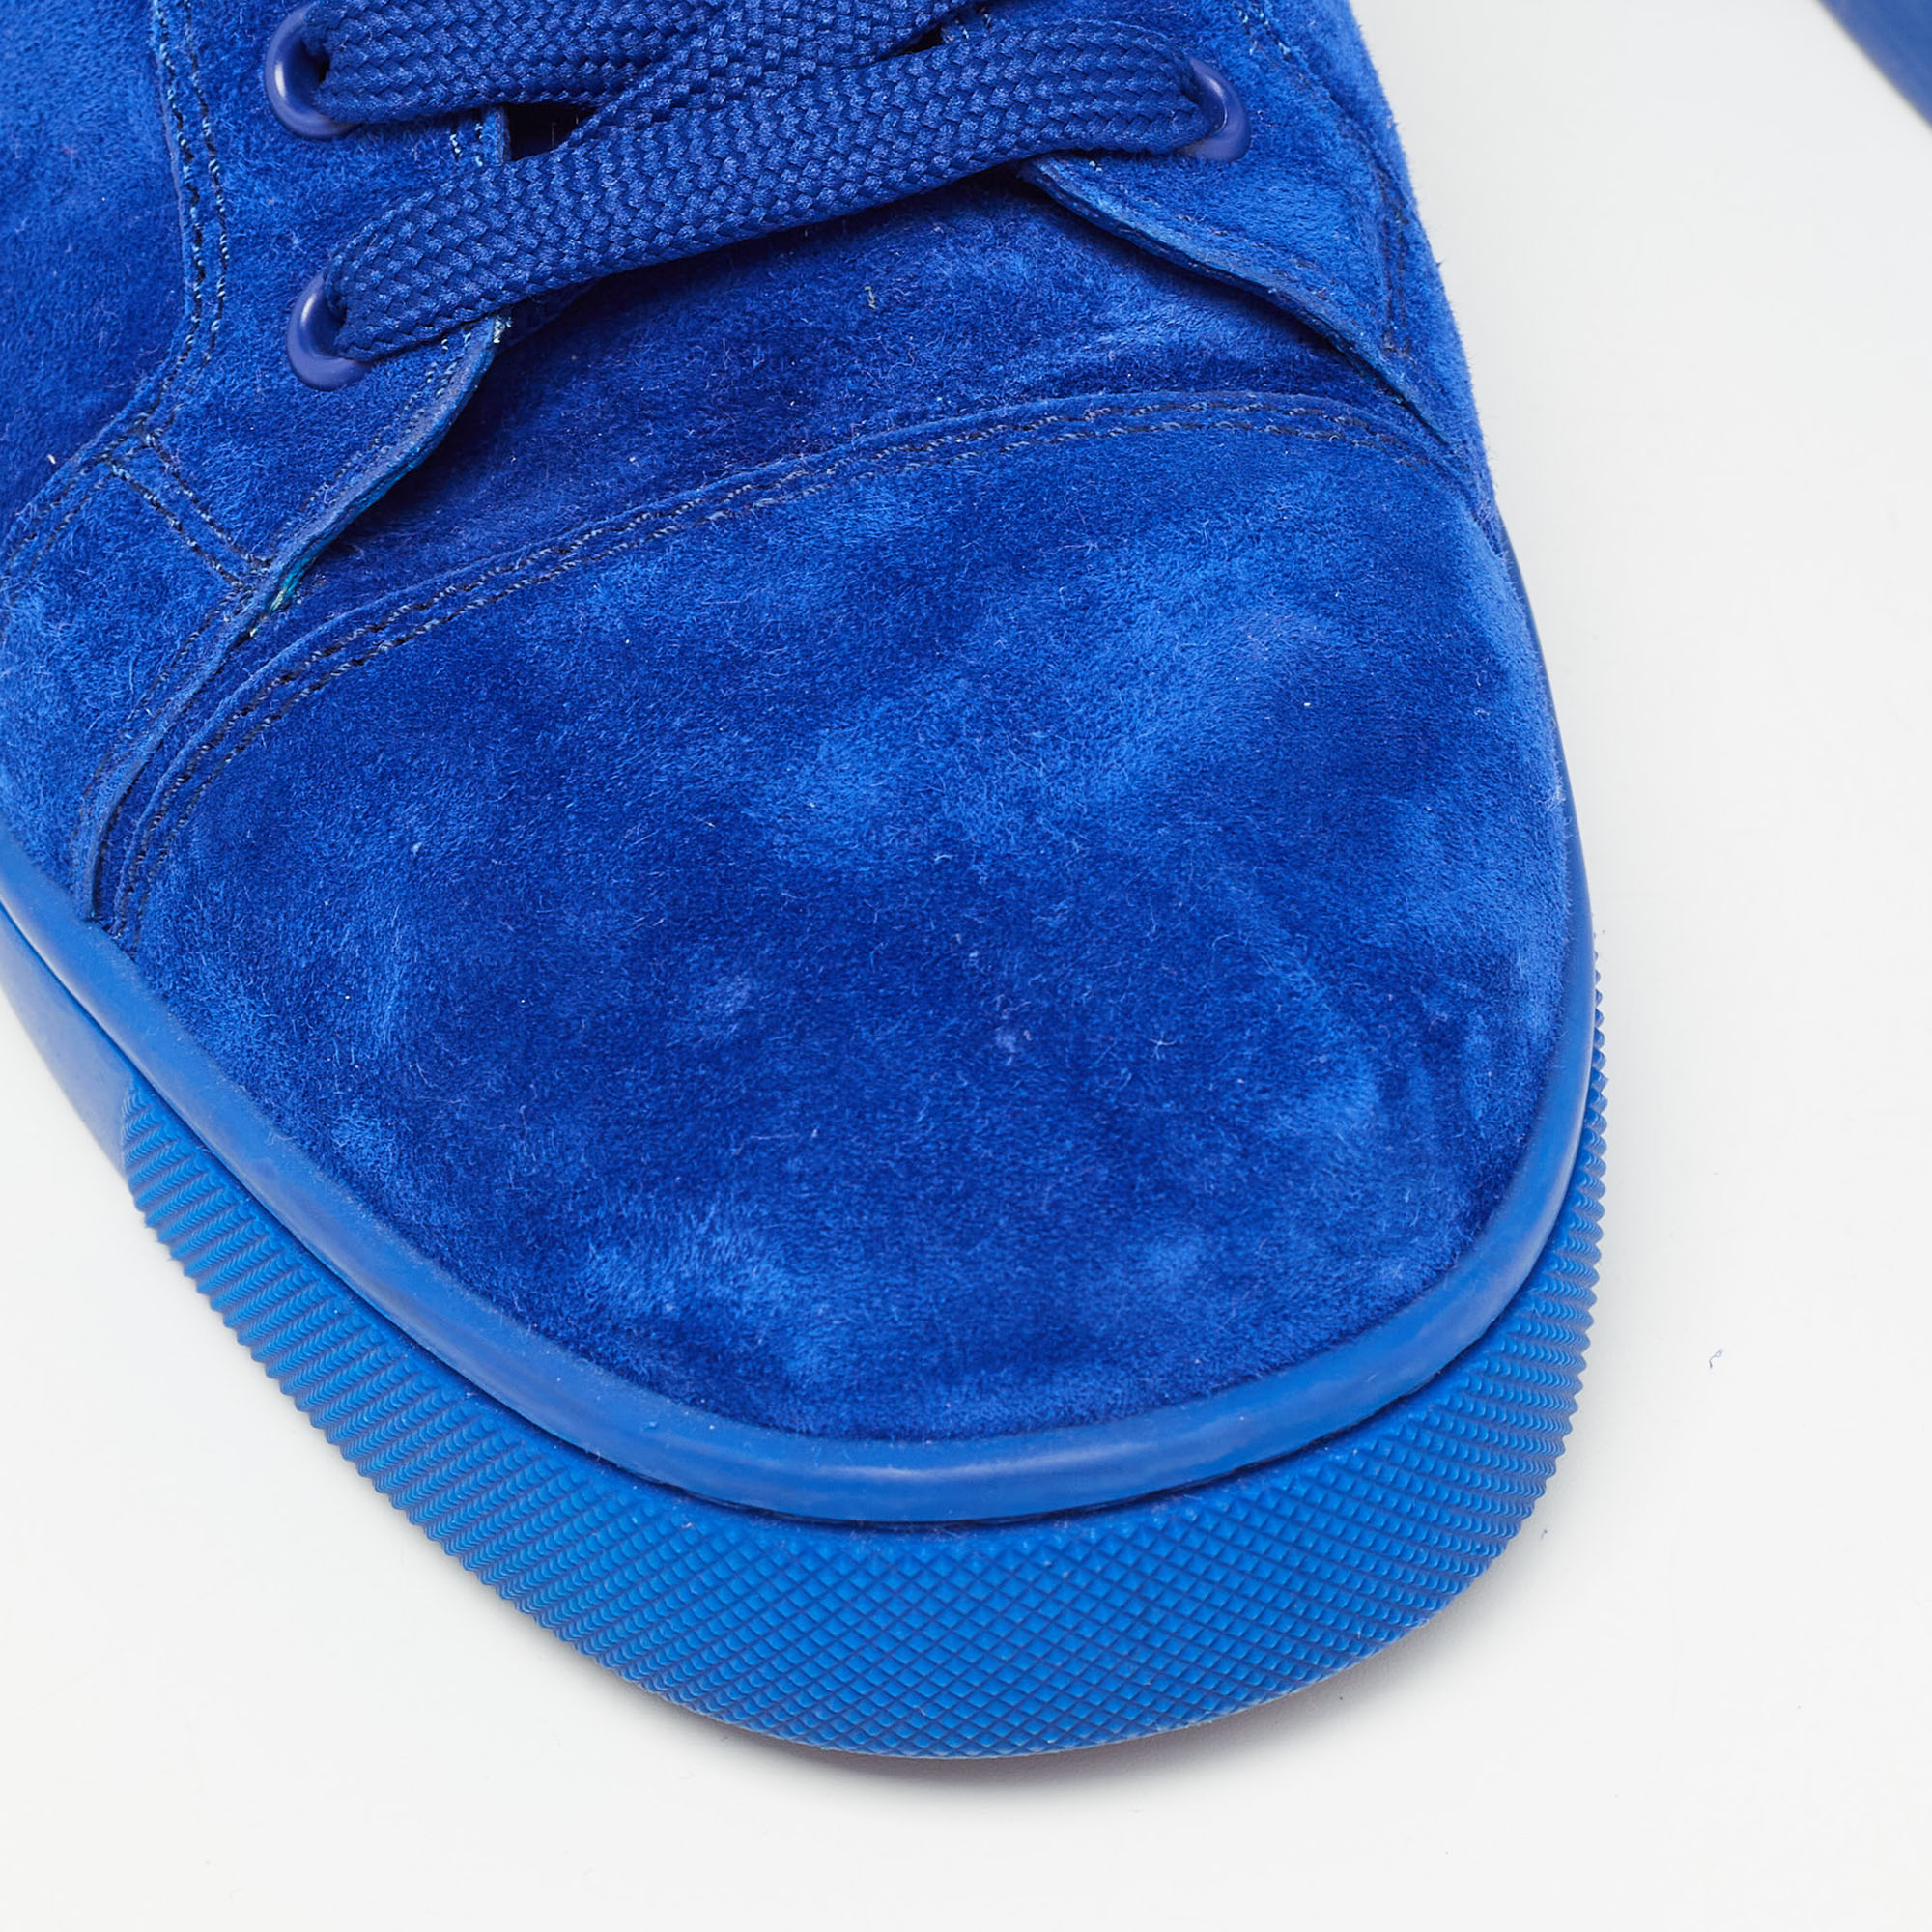 Christian Louboutin Blue Suede Leather Low Top Sneakers Size 42.5